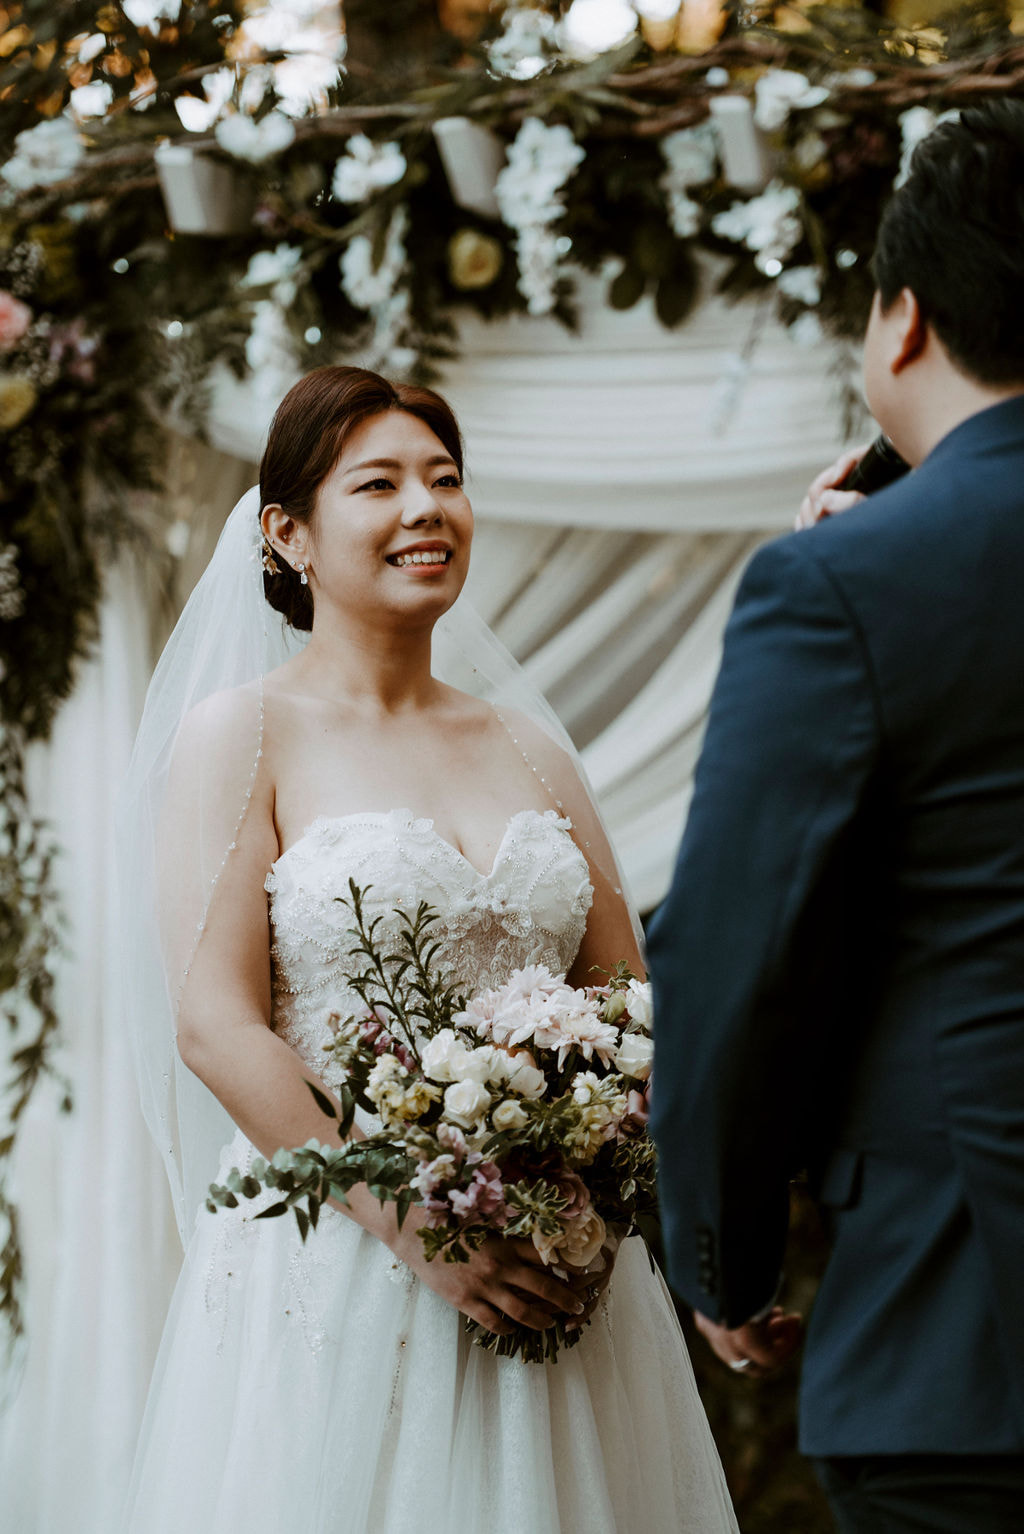 bride smiling at garden altar with greenery and white fabric